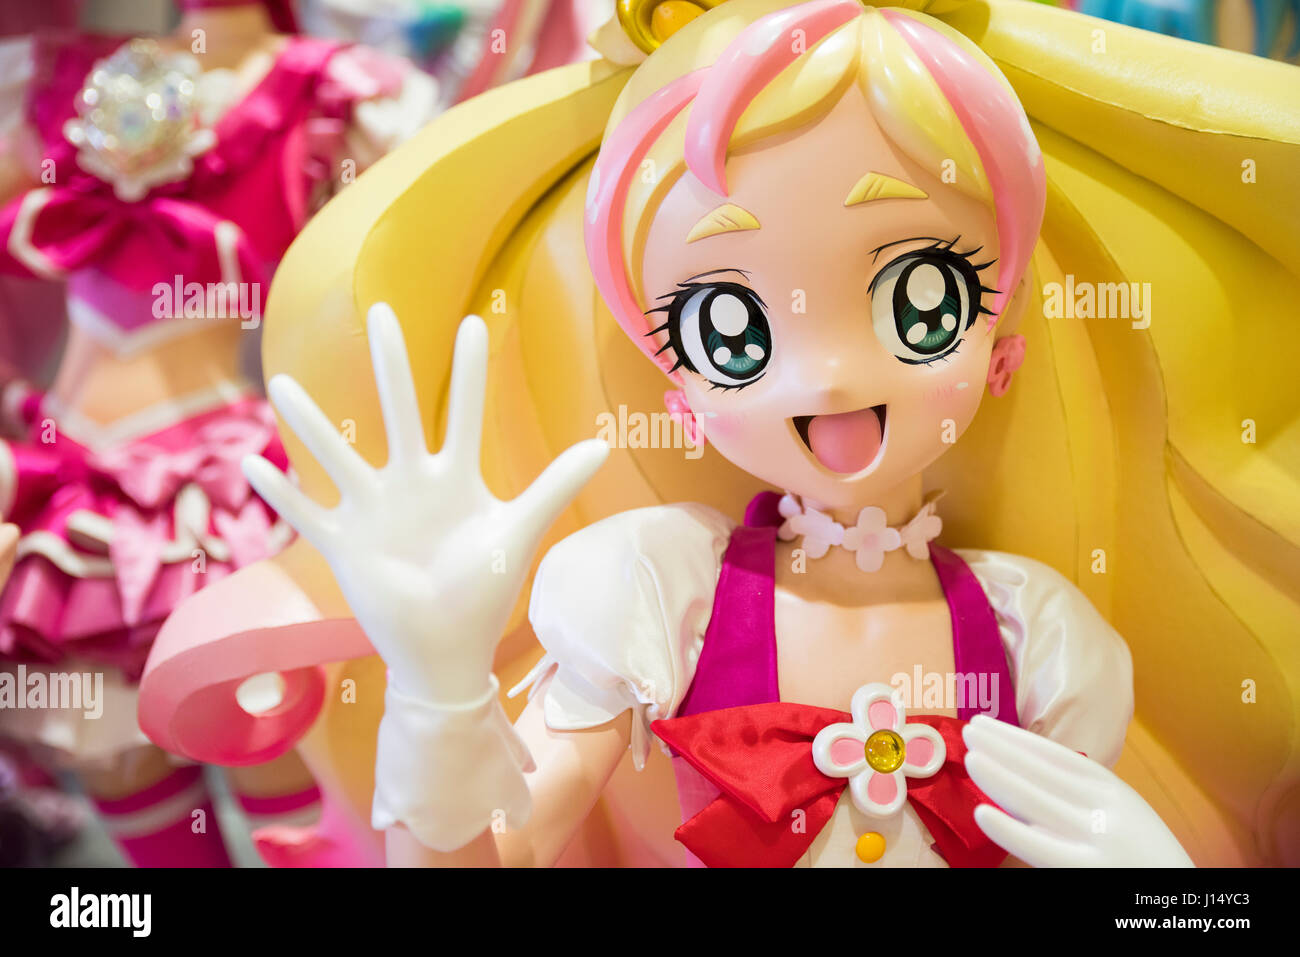 Pretty Cure aka PreCure Japanese anime characters by Toei at the Toei Kyoto  Studio Park, Kyoto, Japan Stock Photo - Alamy